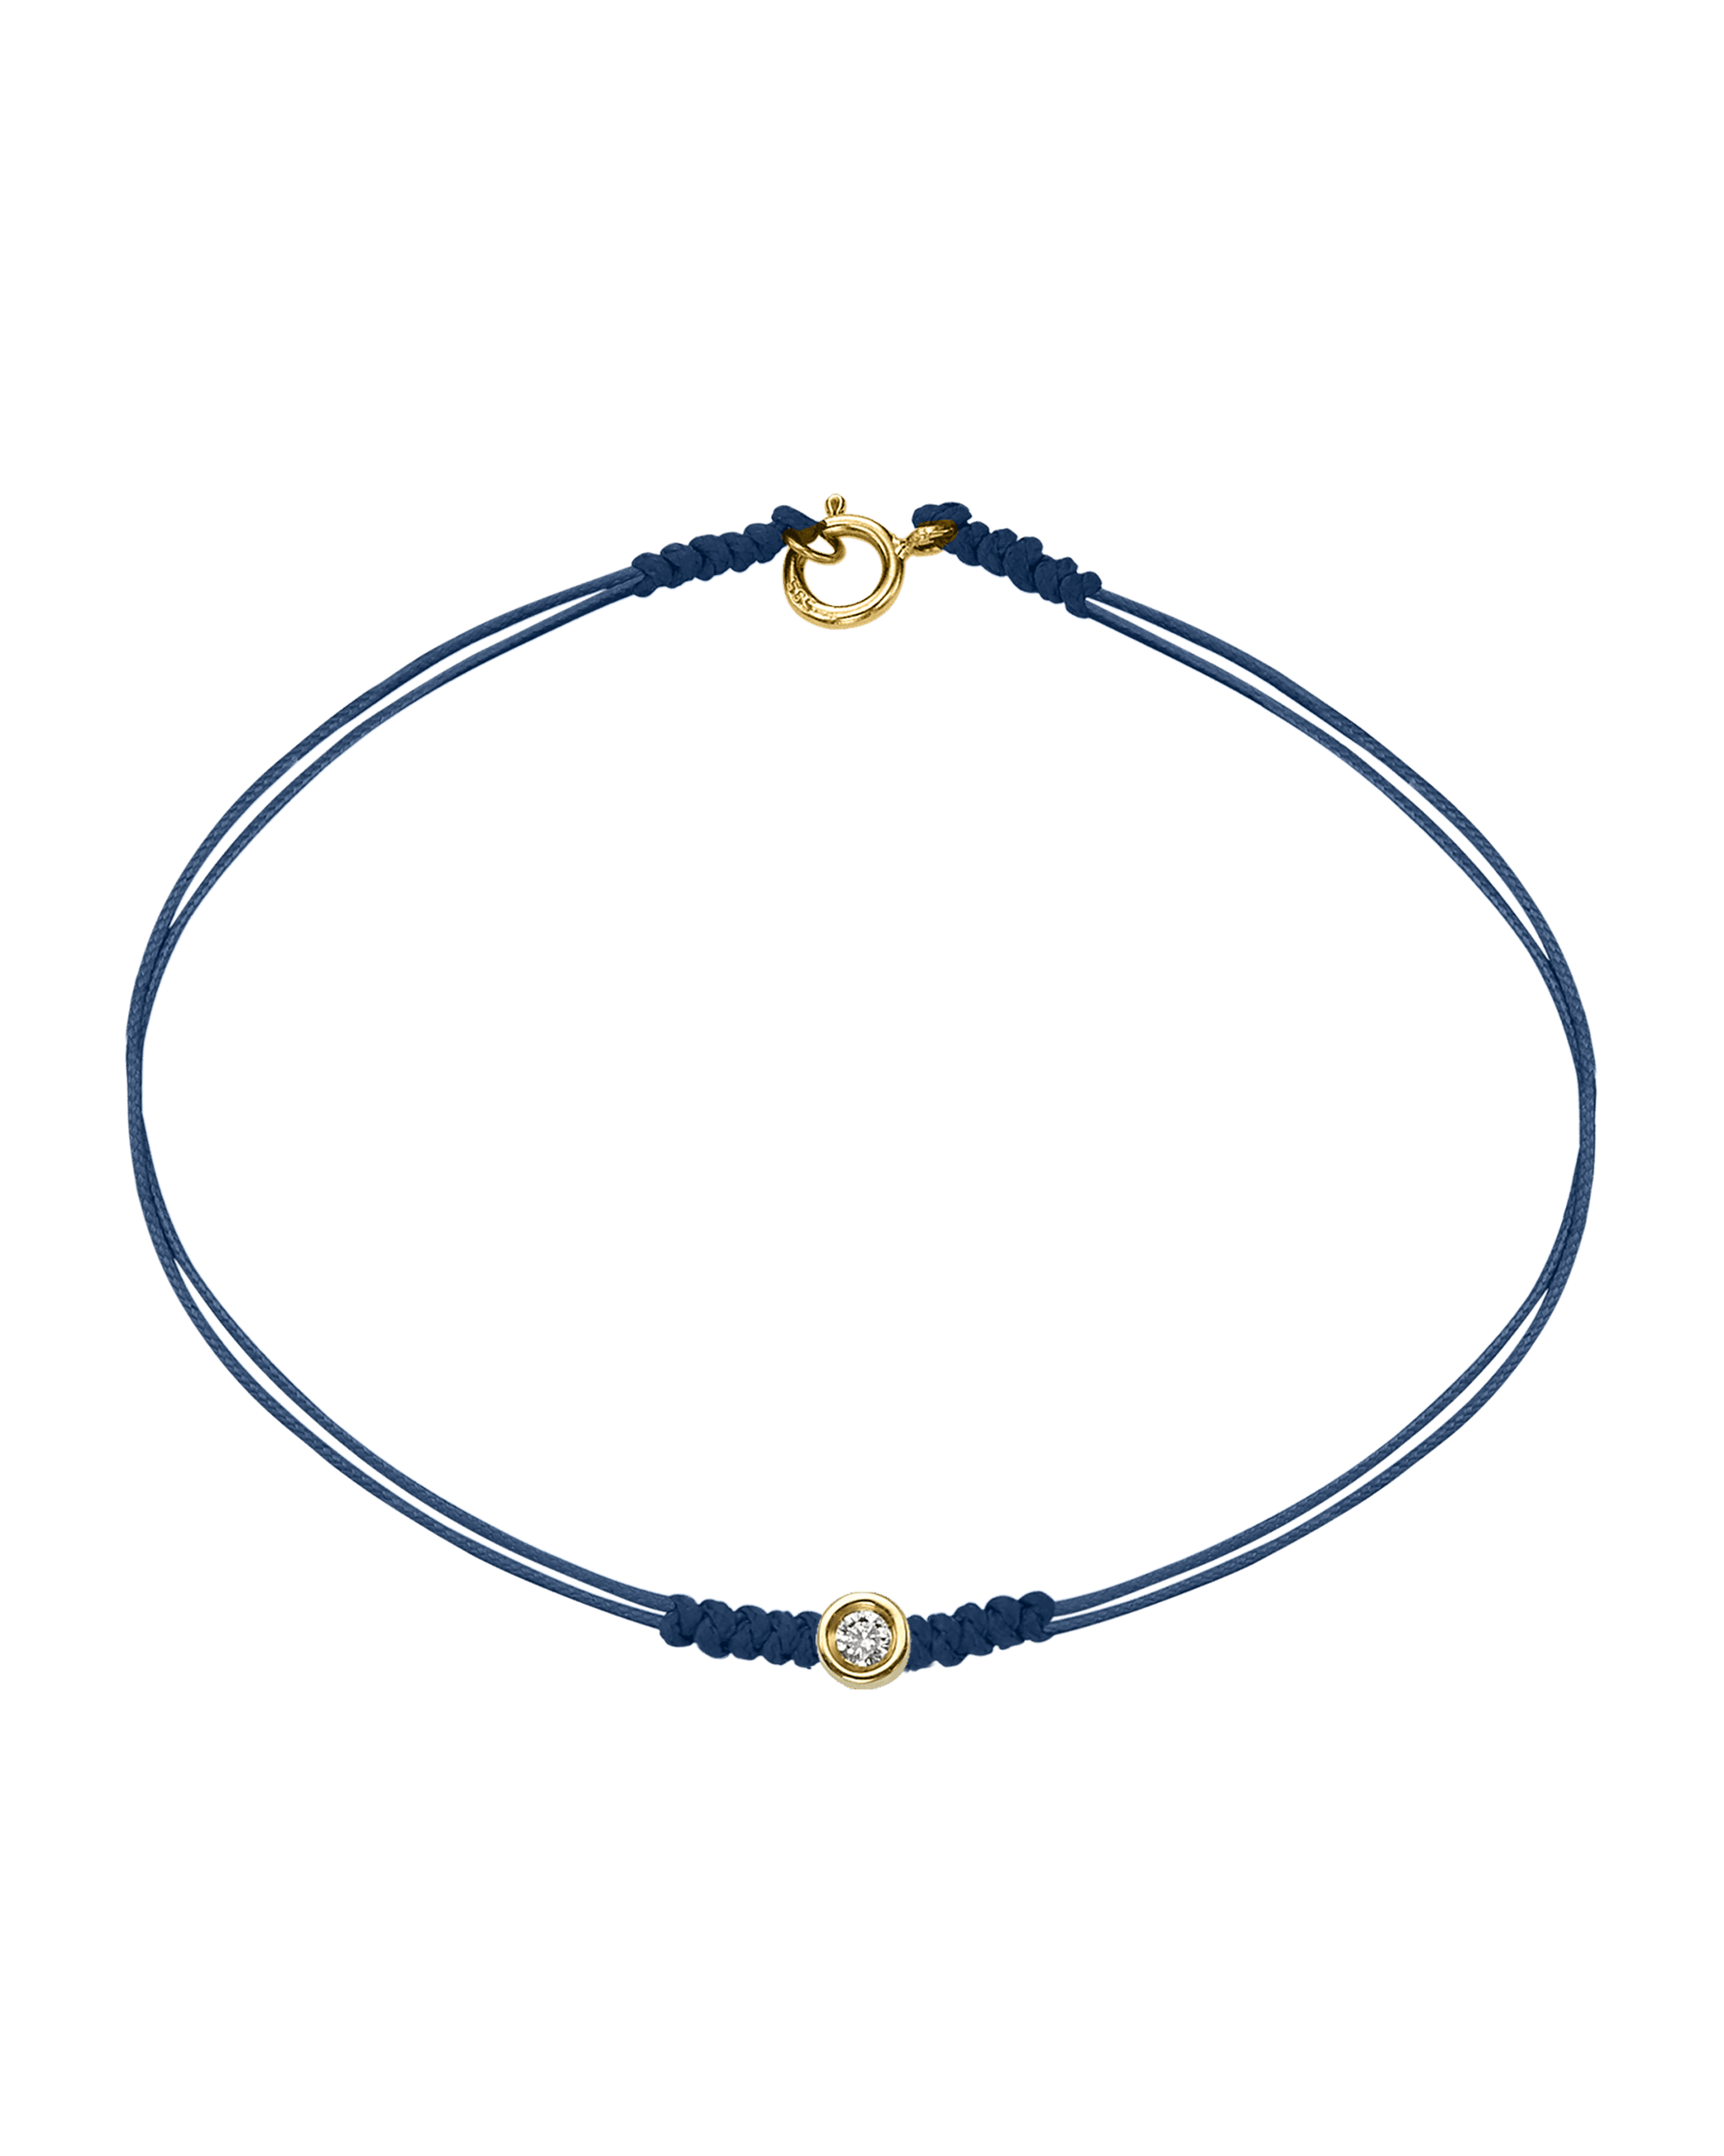 The Classic String of Love with clasp - 14K Yellow Gold Bracelets 14K Solid Gold Indigo Small: 0.03ct Small - 6 Inches (15.5cm)